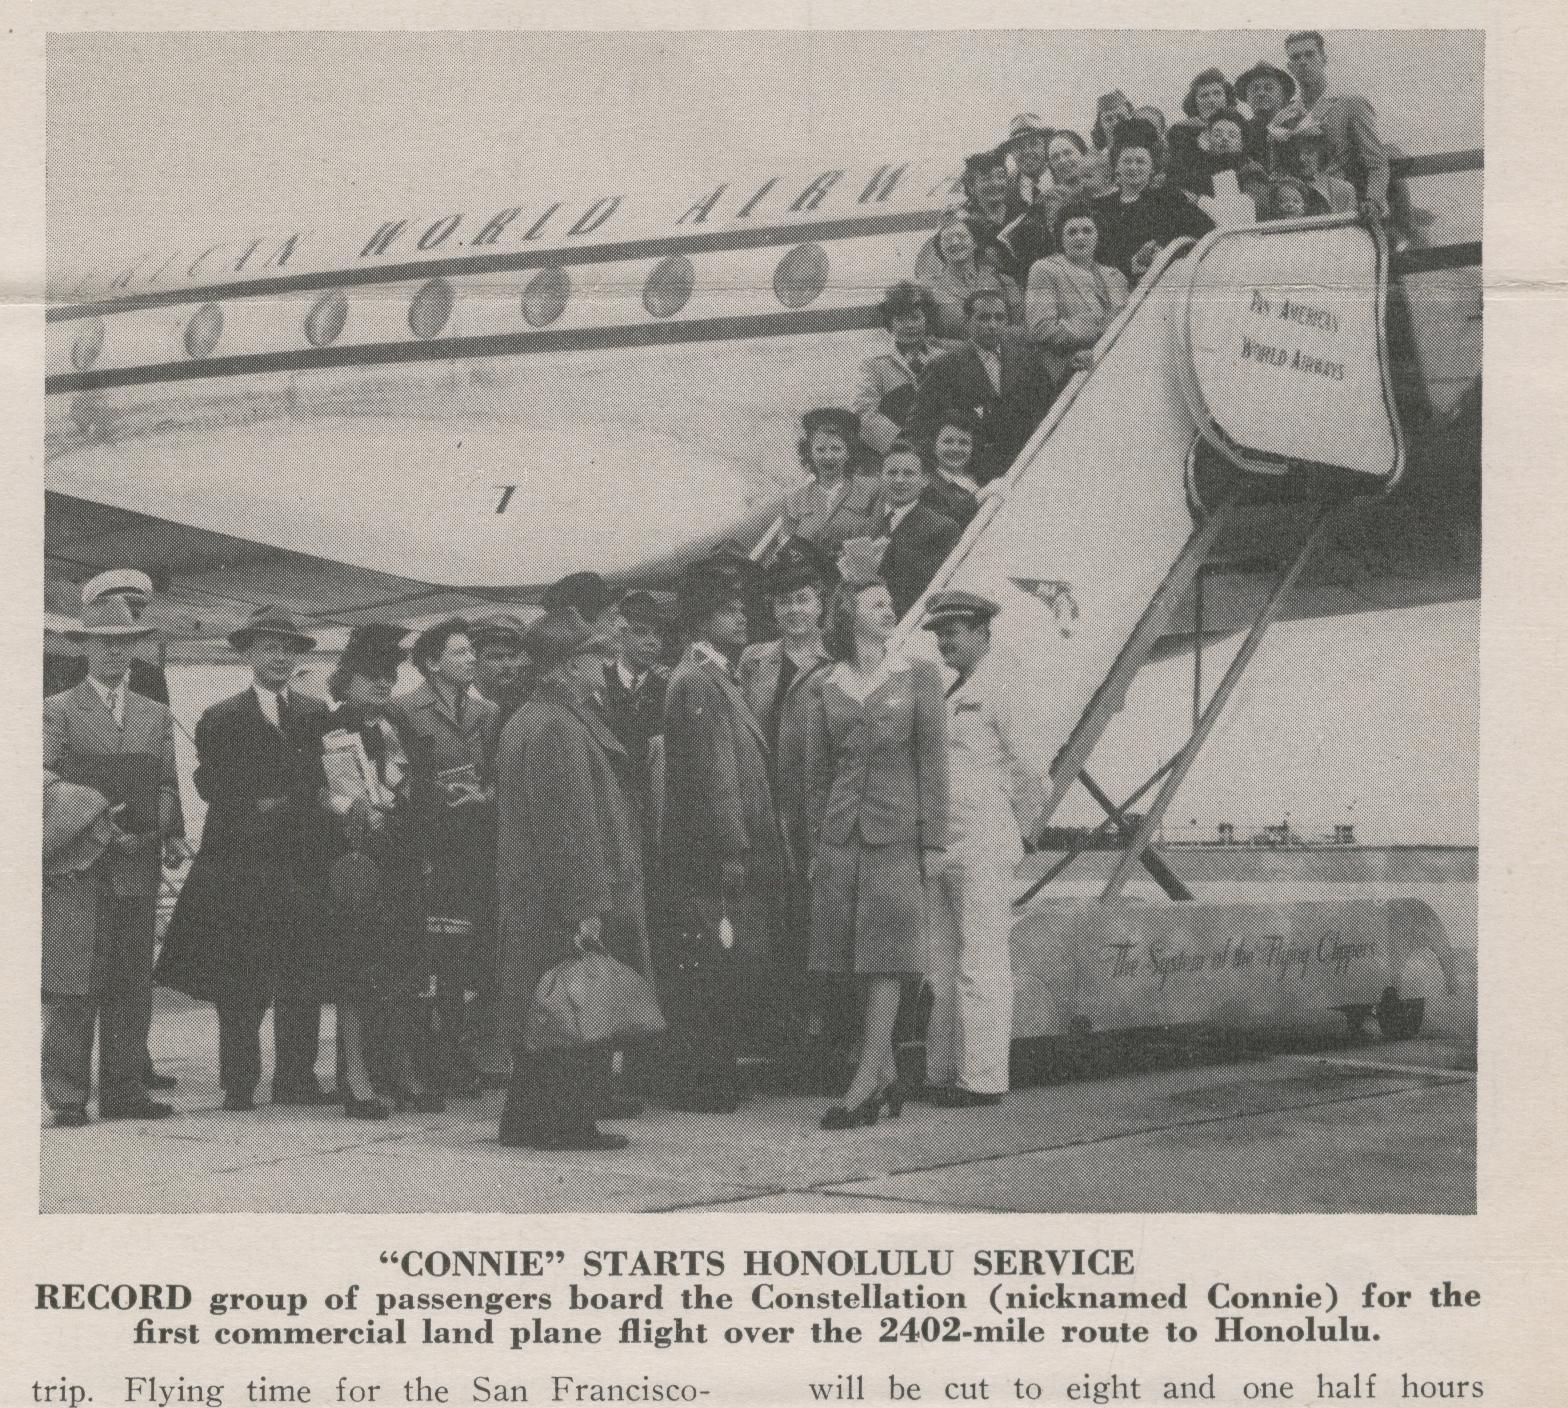 1946 Pan Am's first Constellation service to Honolulu.